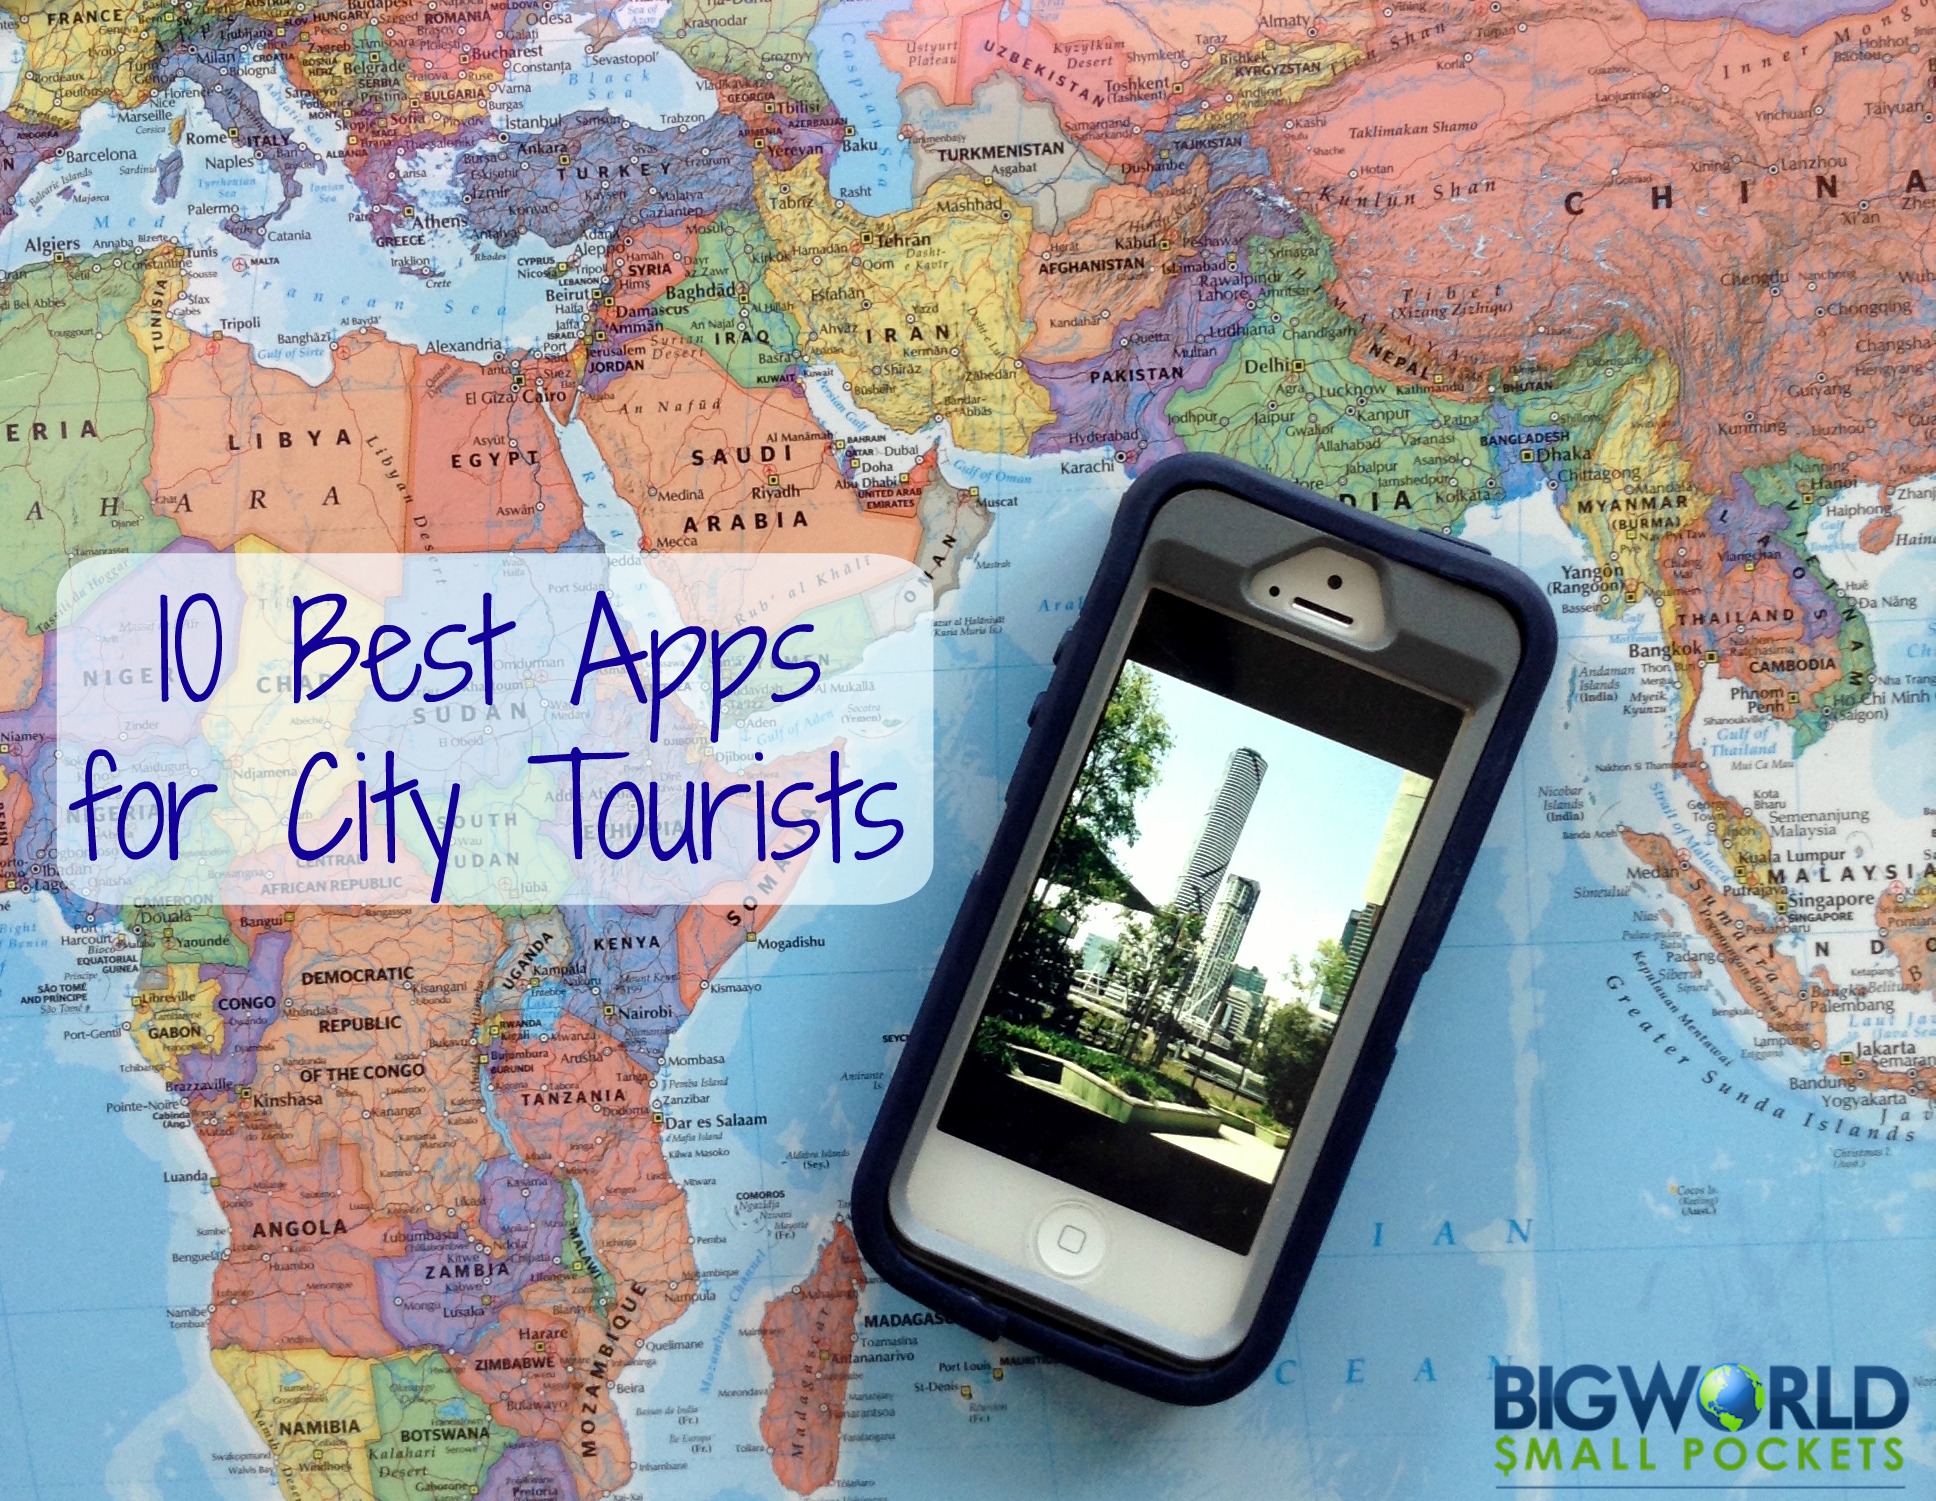 10 Best Apps for City Tourists